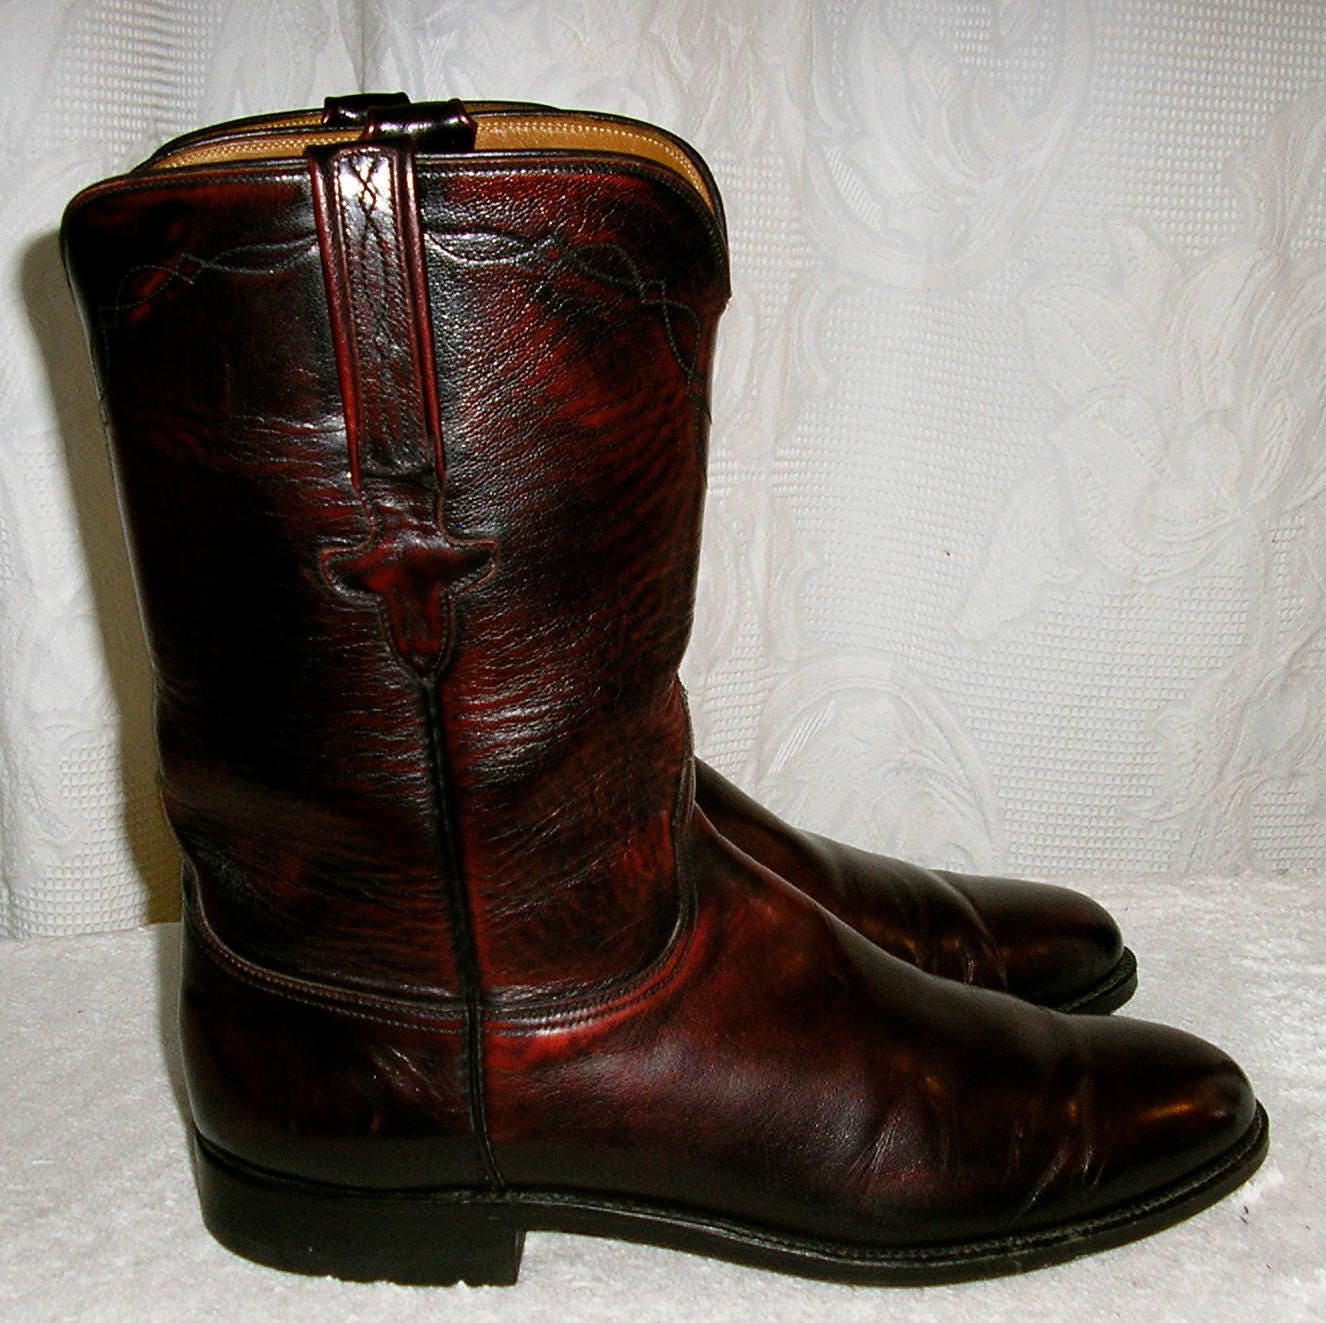 Canty Boots MT - Size 9 lucchese with full Louis Vuitton